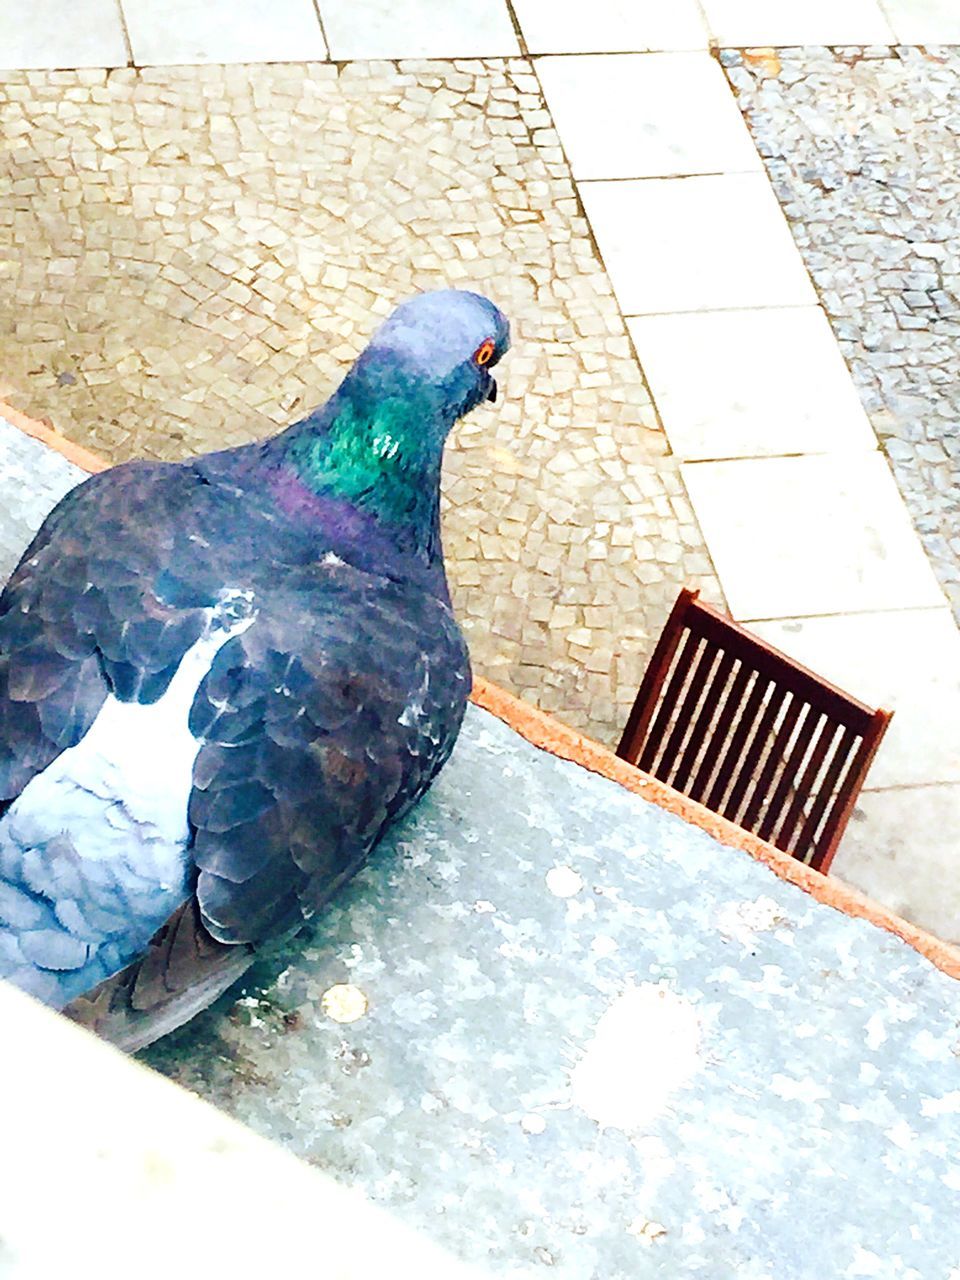 bird, animal themes, one animal, animals in the wild, pigeon, wildlife, full length, high angle view, perching, sidewalk, outdoors, street, day, no people, duck, side view, pavement, zoology, cobblestone, vertebrate